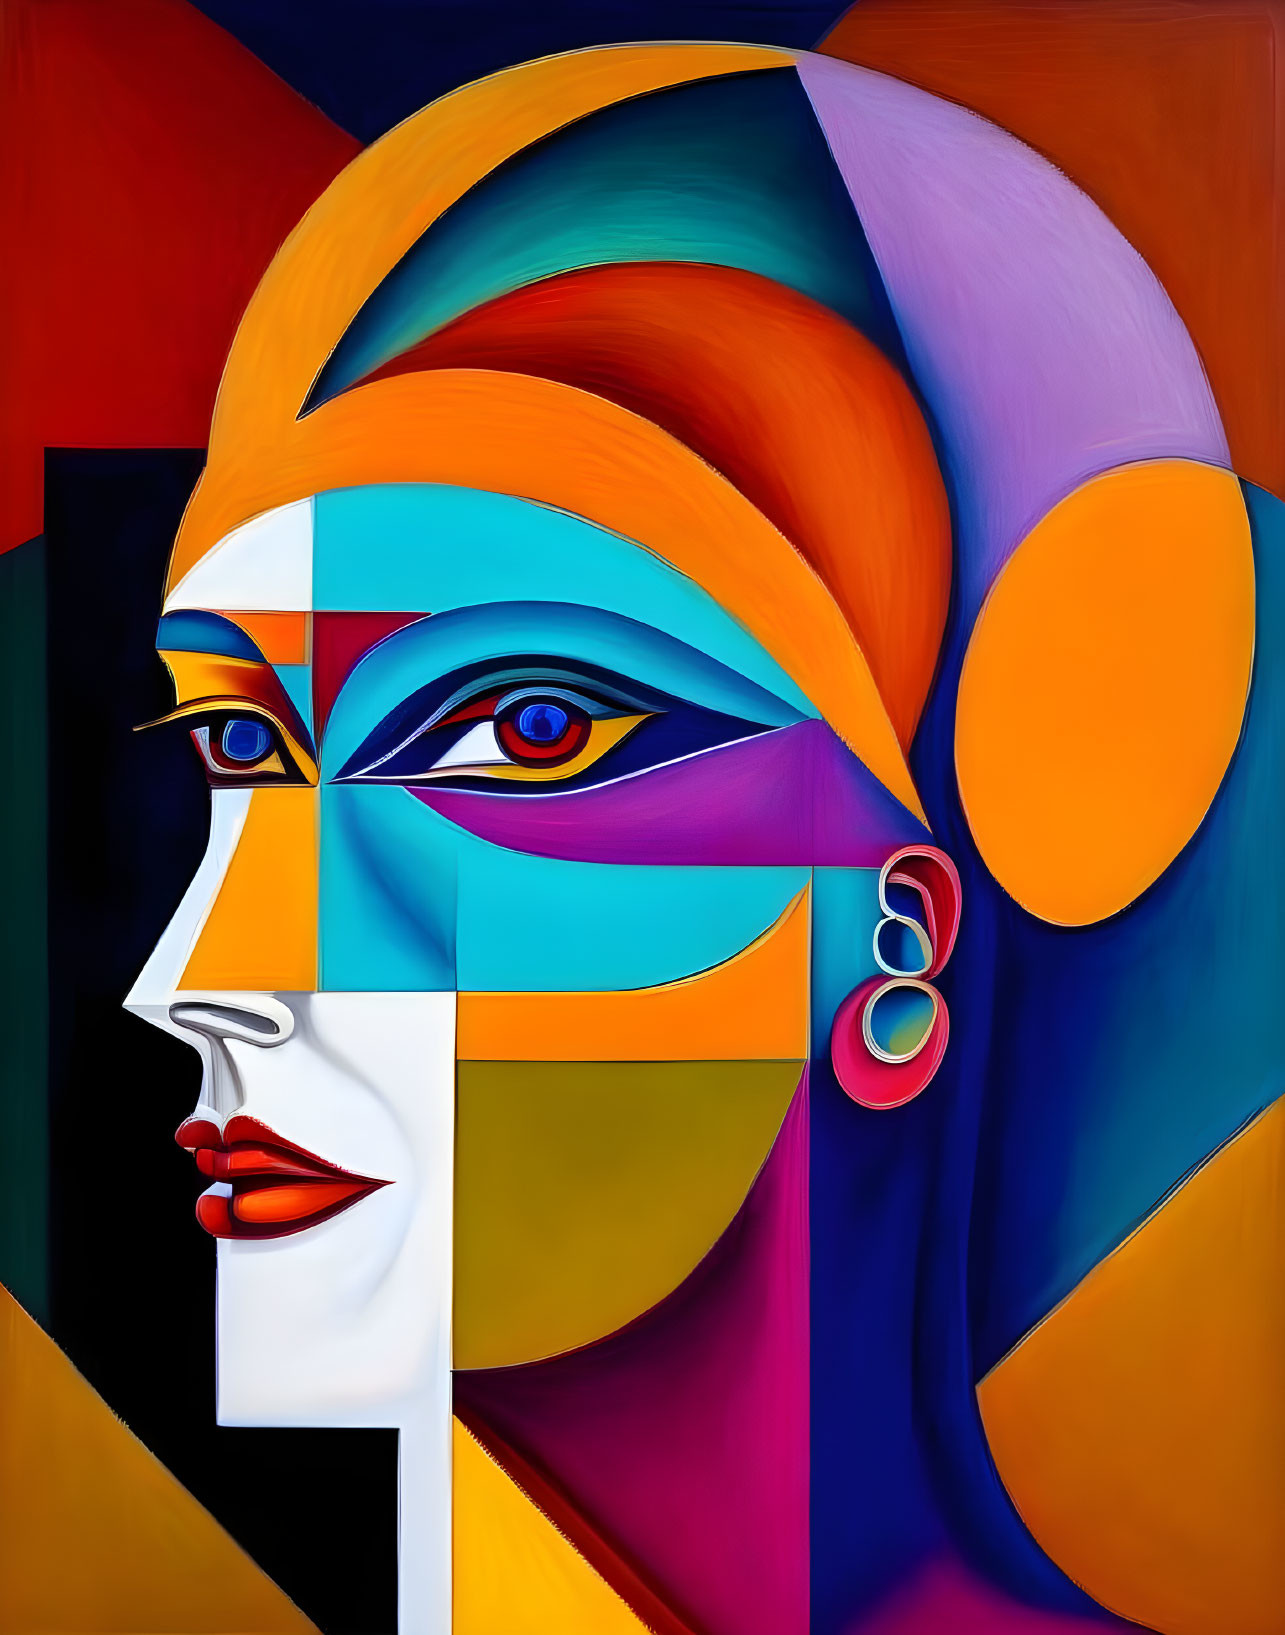 Abstract Portrait of Stylized Female Face with Geometric Patterns